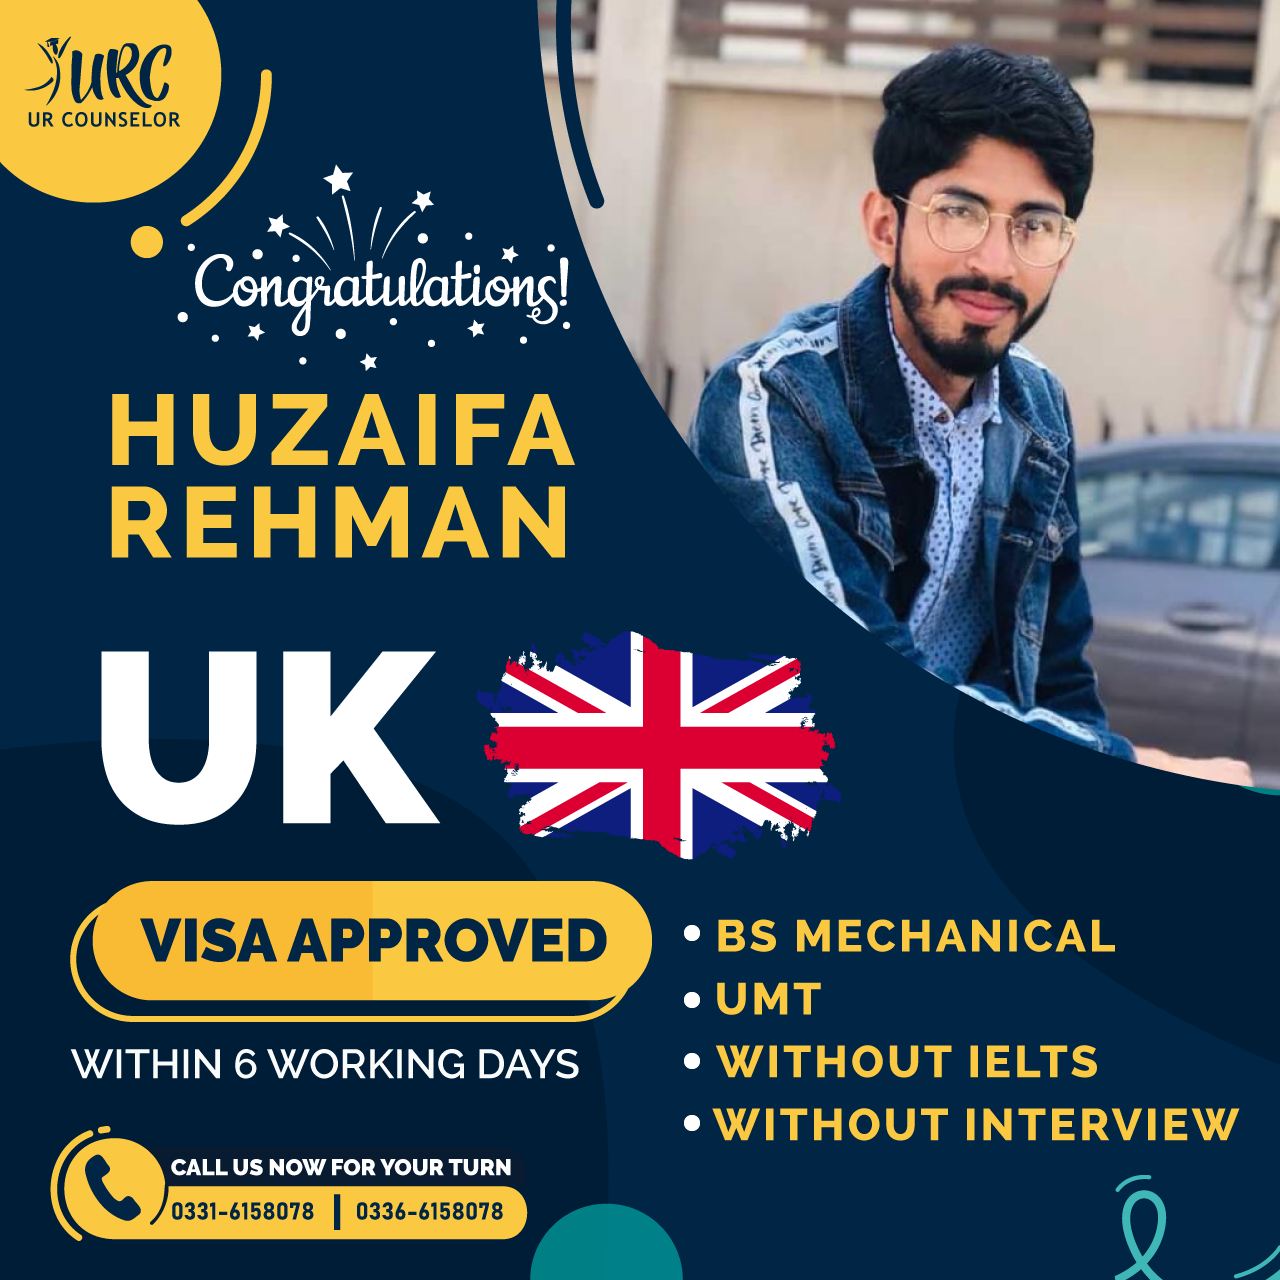 UK Visa Approved Without IELTS